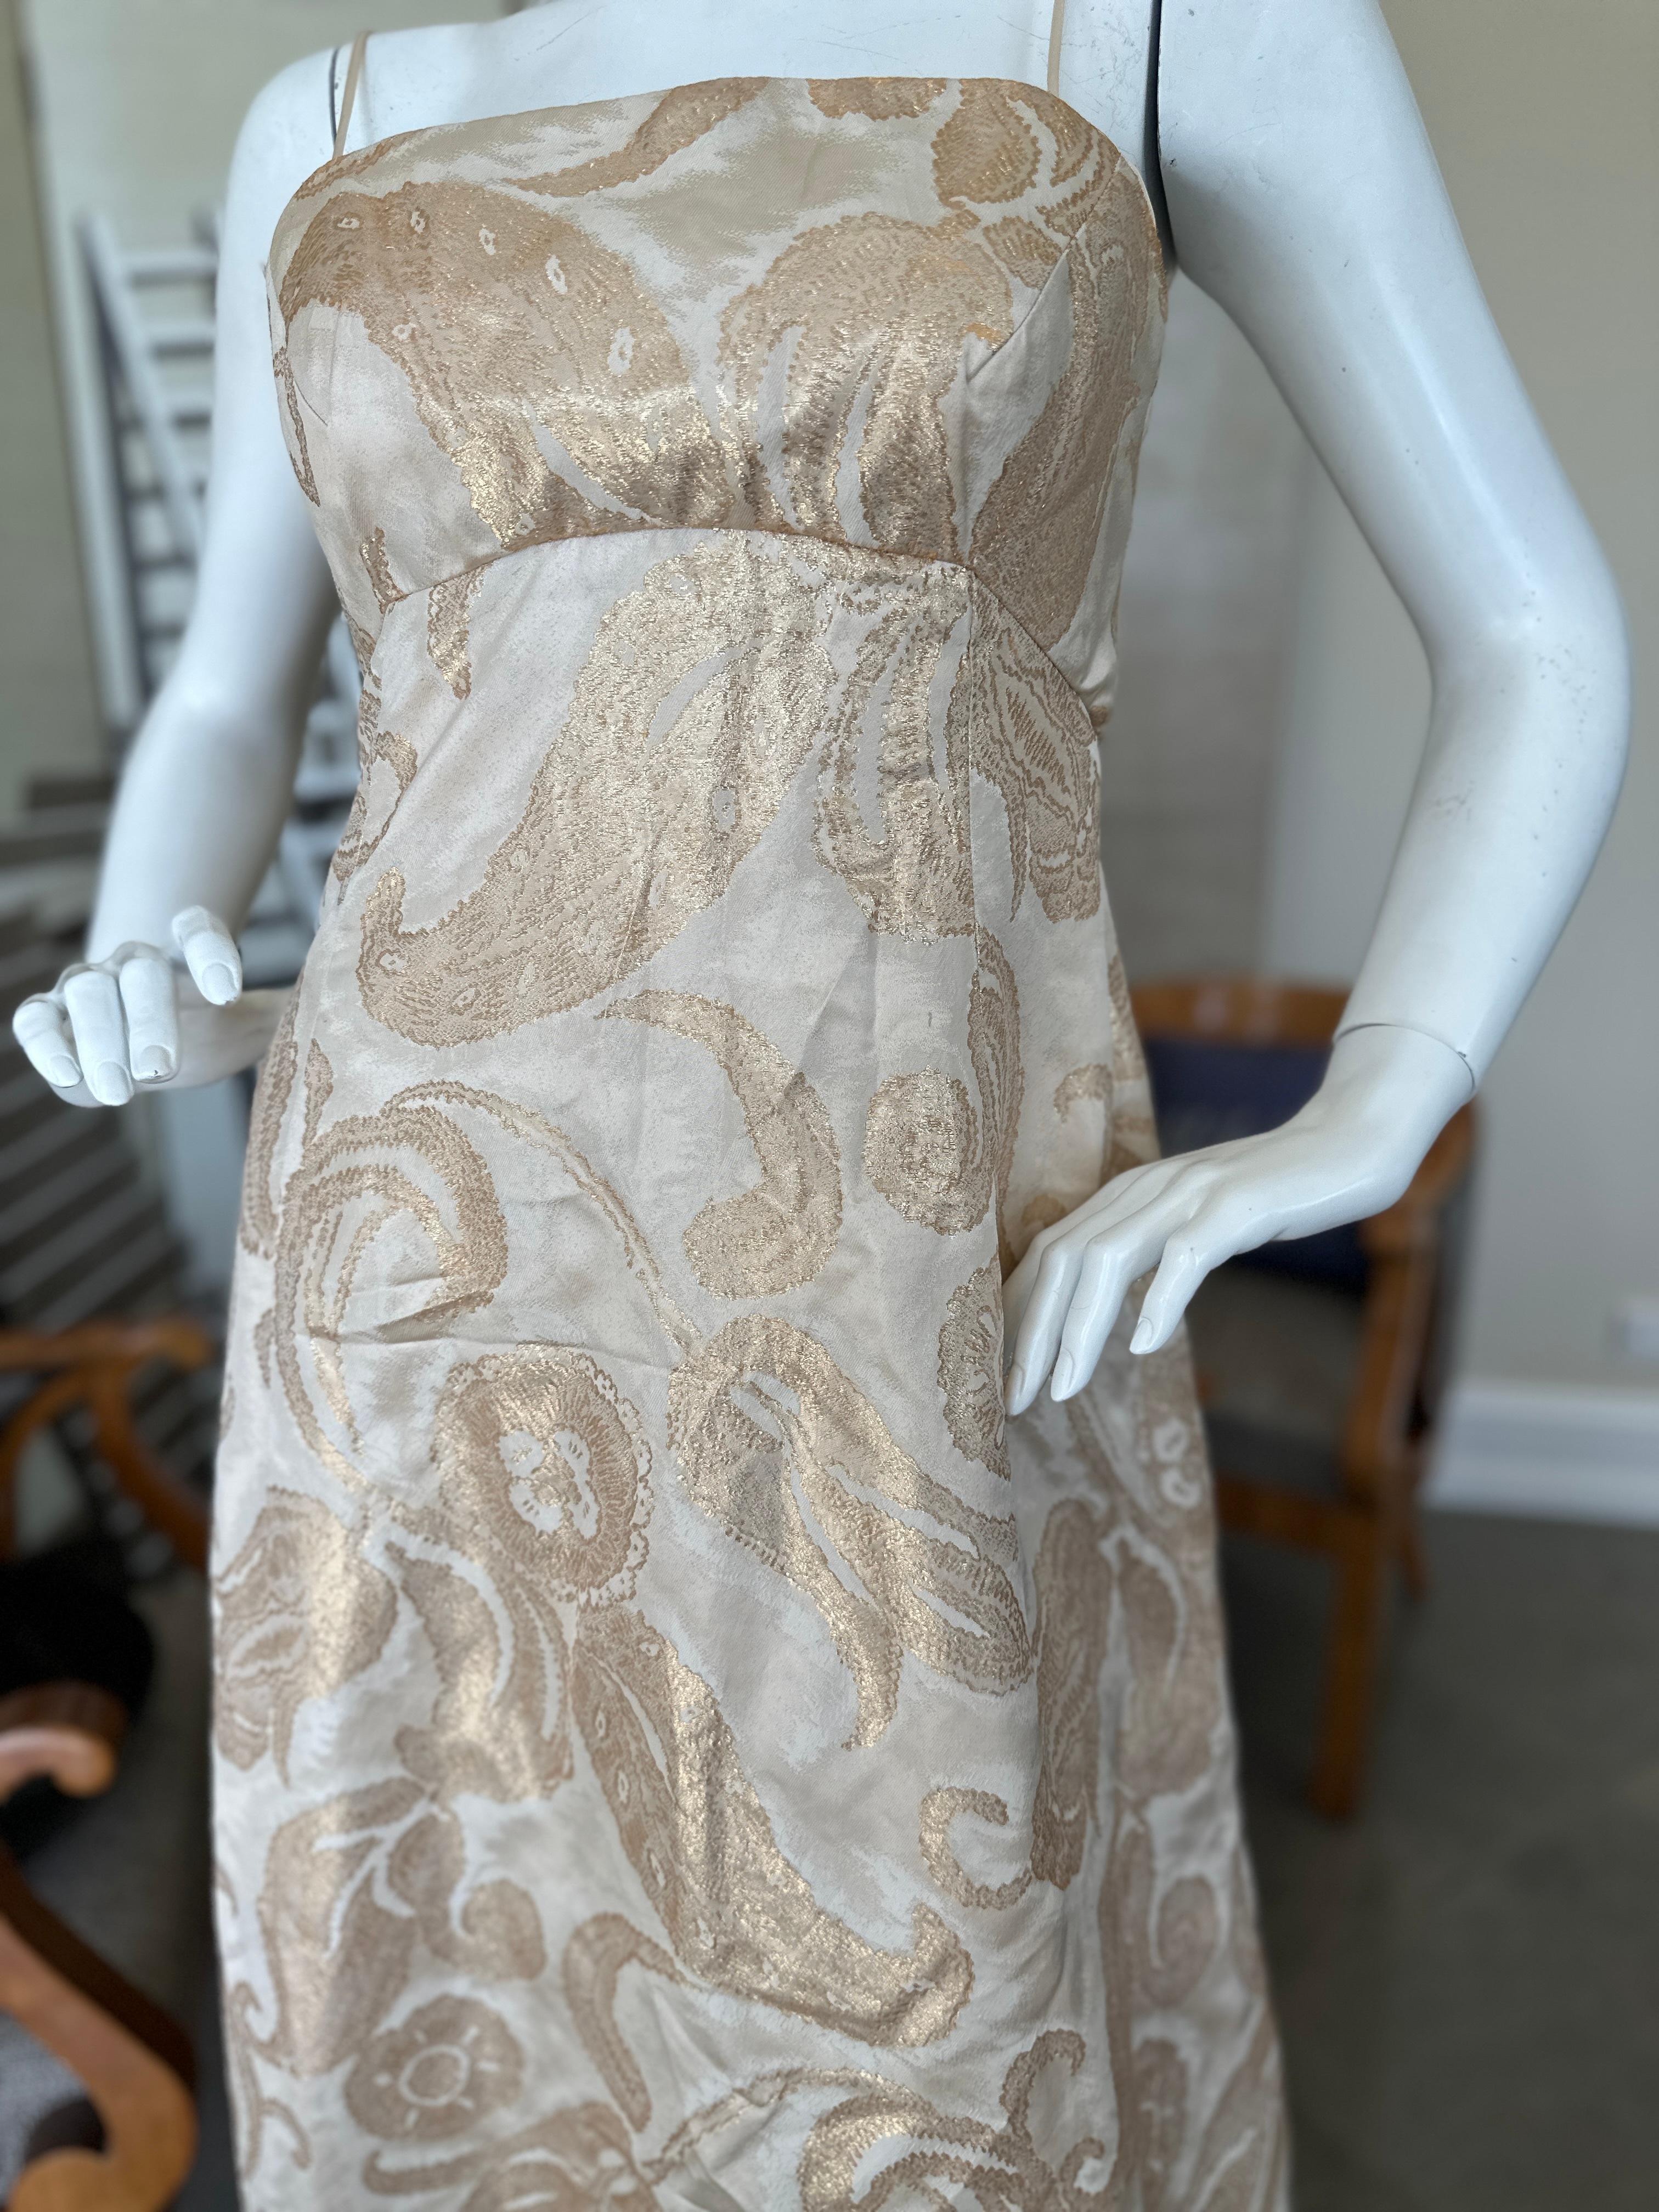  Malcolm Starr Vintage Gold Brocade Evening Dress In Excellent Condition For Sale In Cloverdale, CA